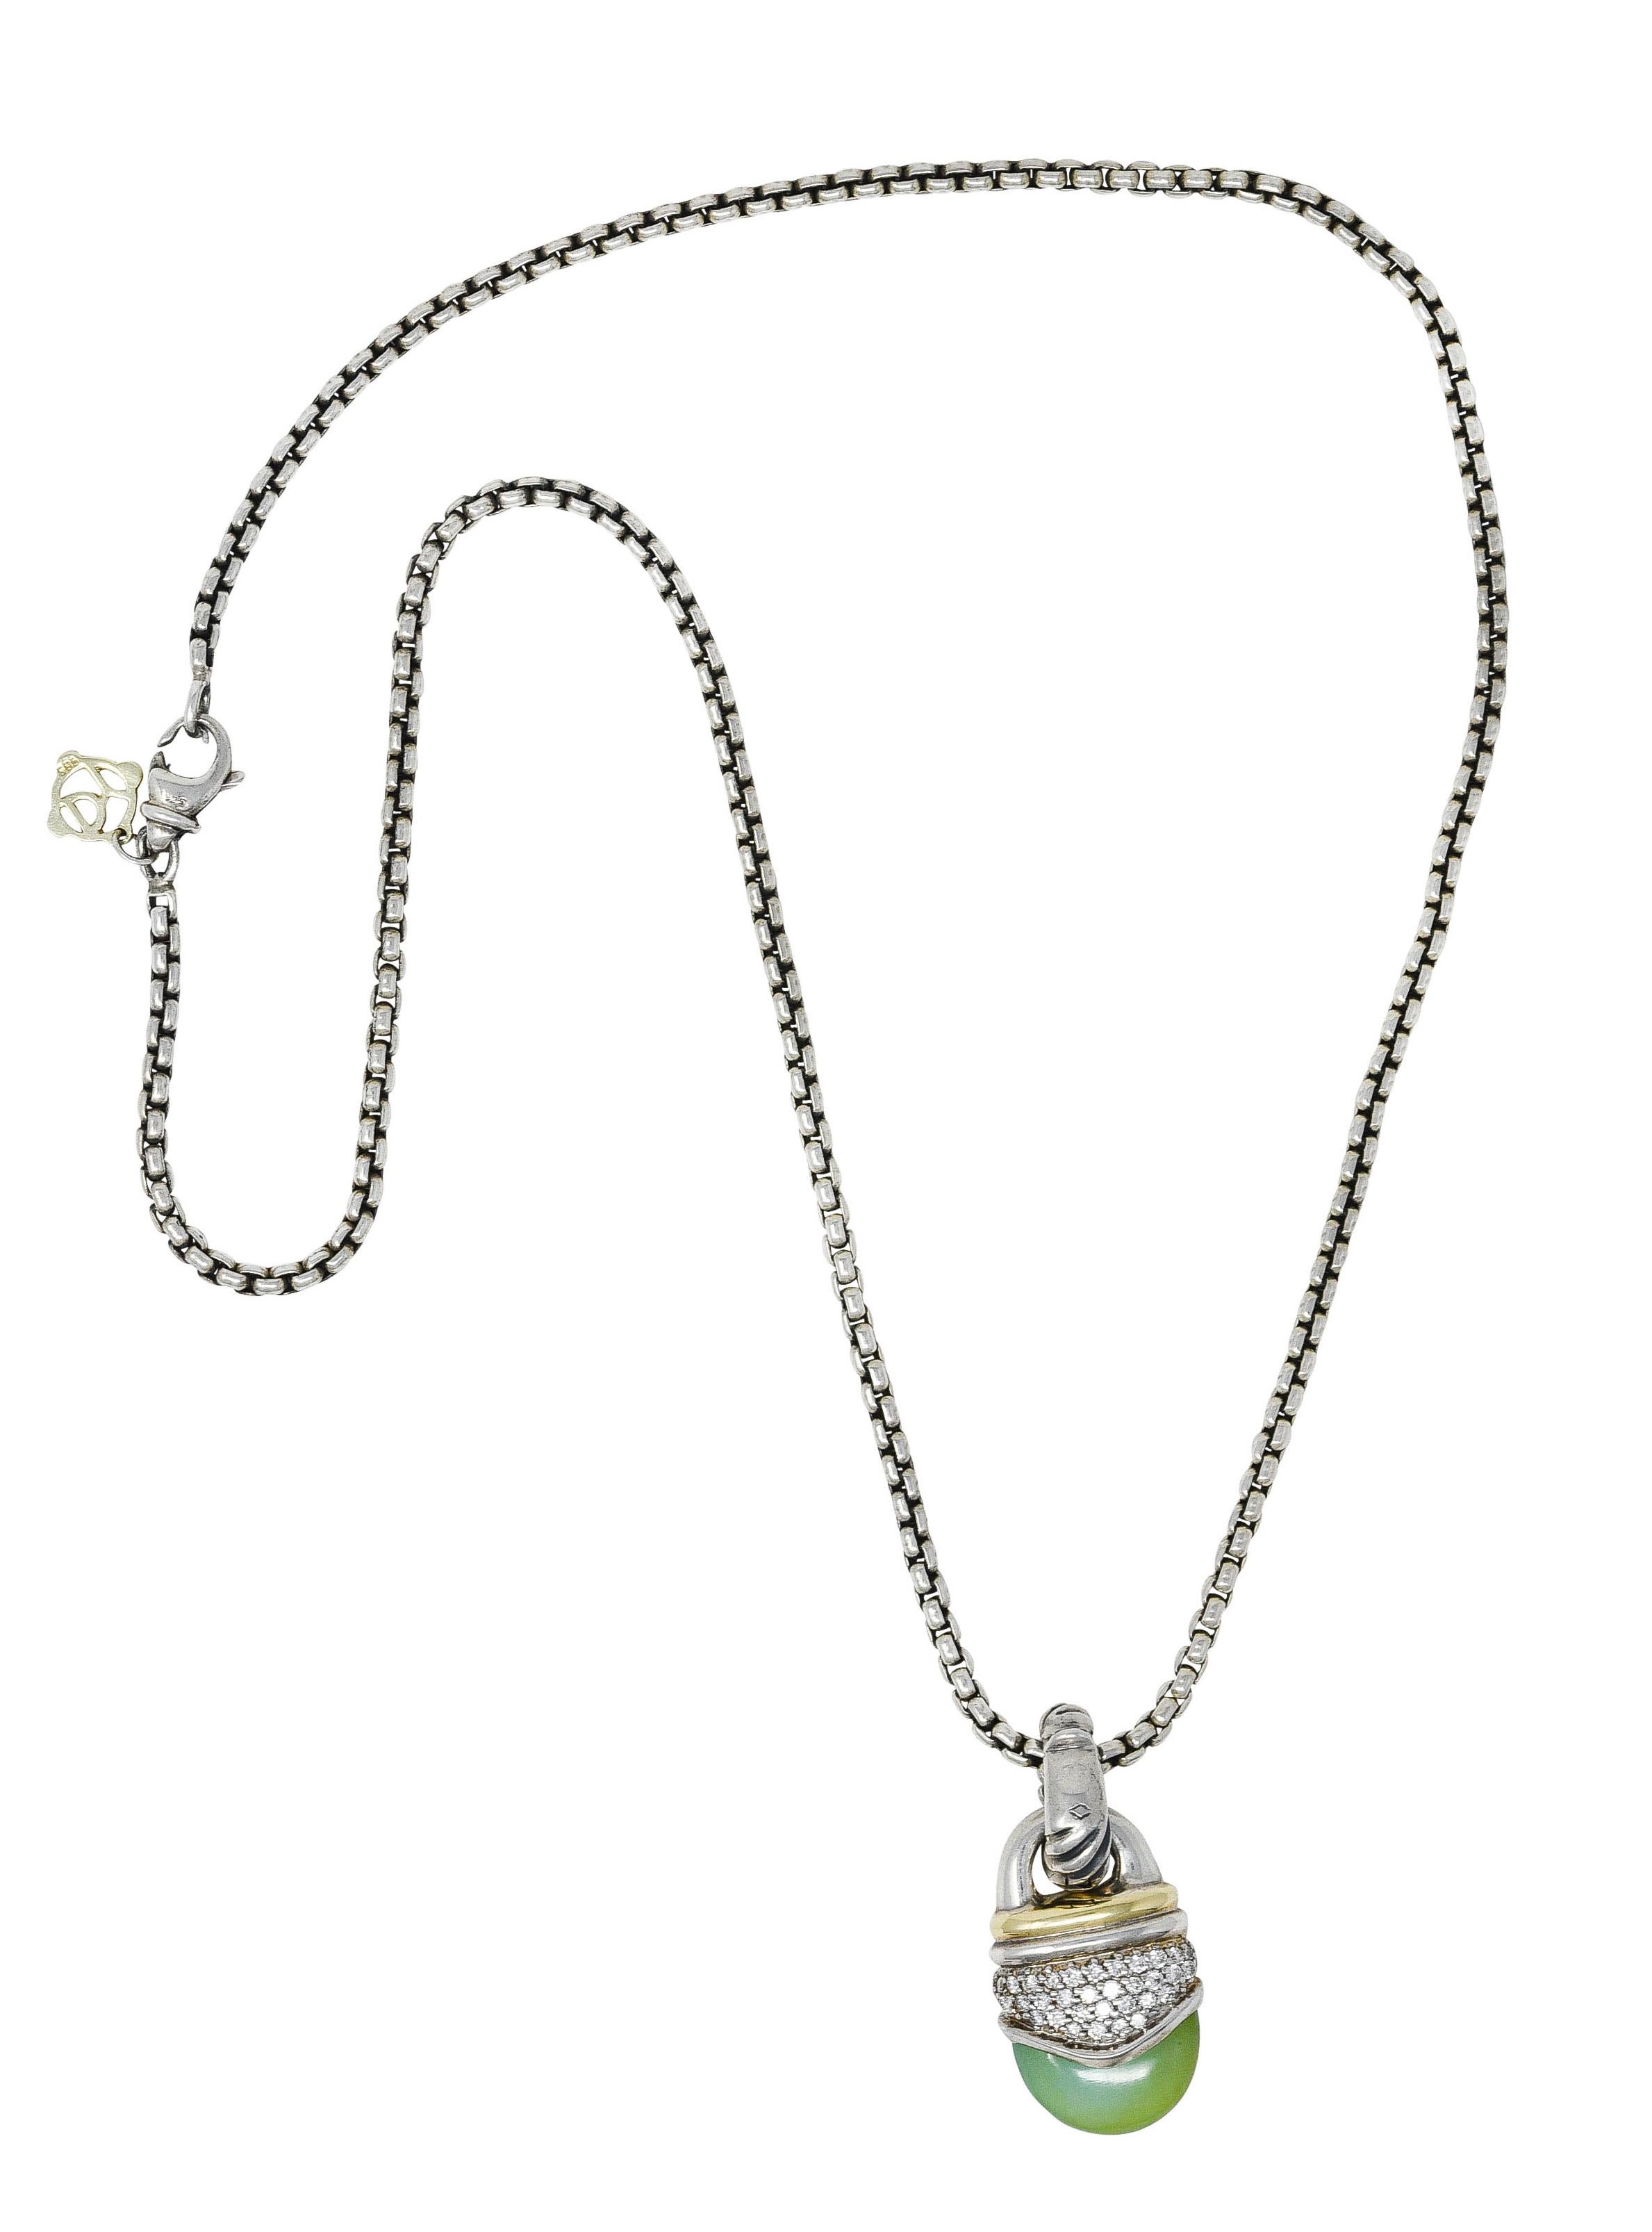 Necklace designed as gemstone drop enhancer pendant suspended from 2.0 mm box chain

Pendant features silver and gold banding above pave diamond mid-section

Diamonds are G/H in color with SI clarity - weighing approximately 0.33 carat

With